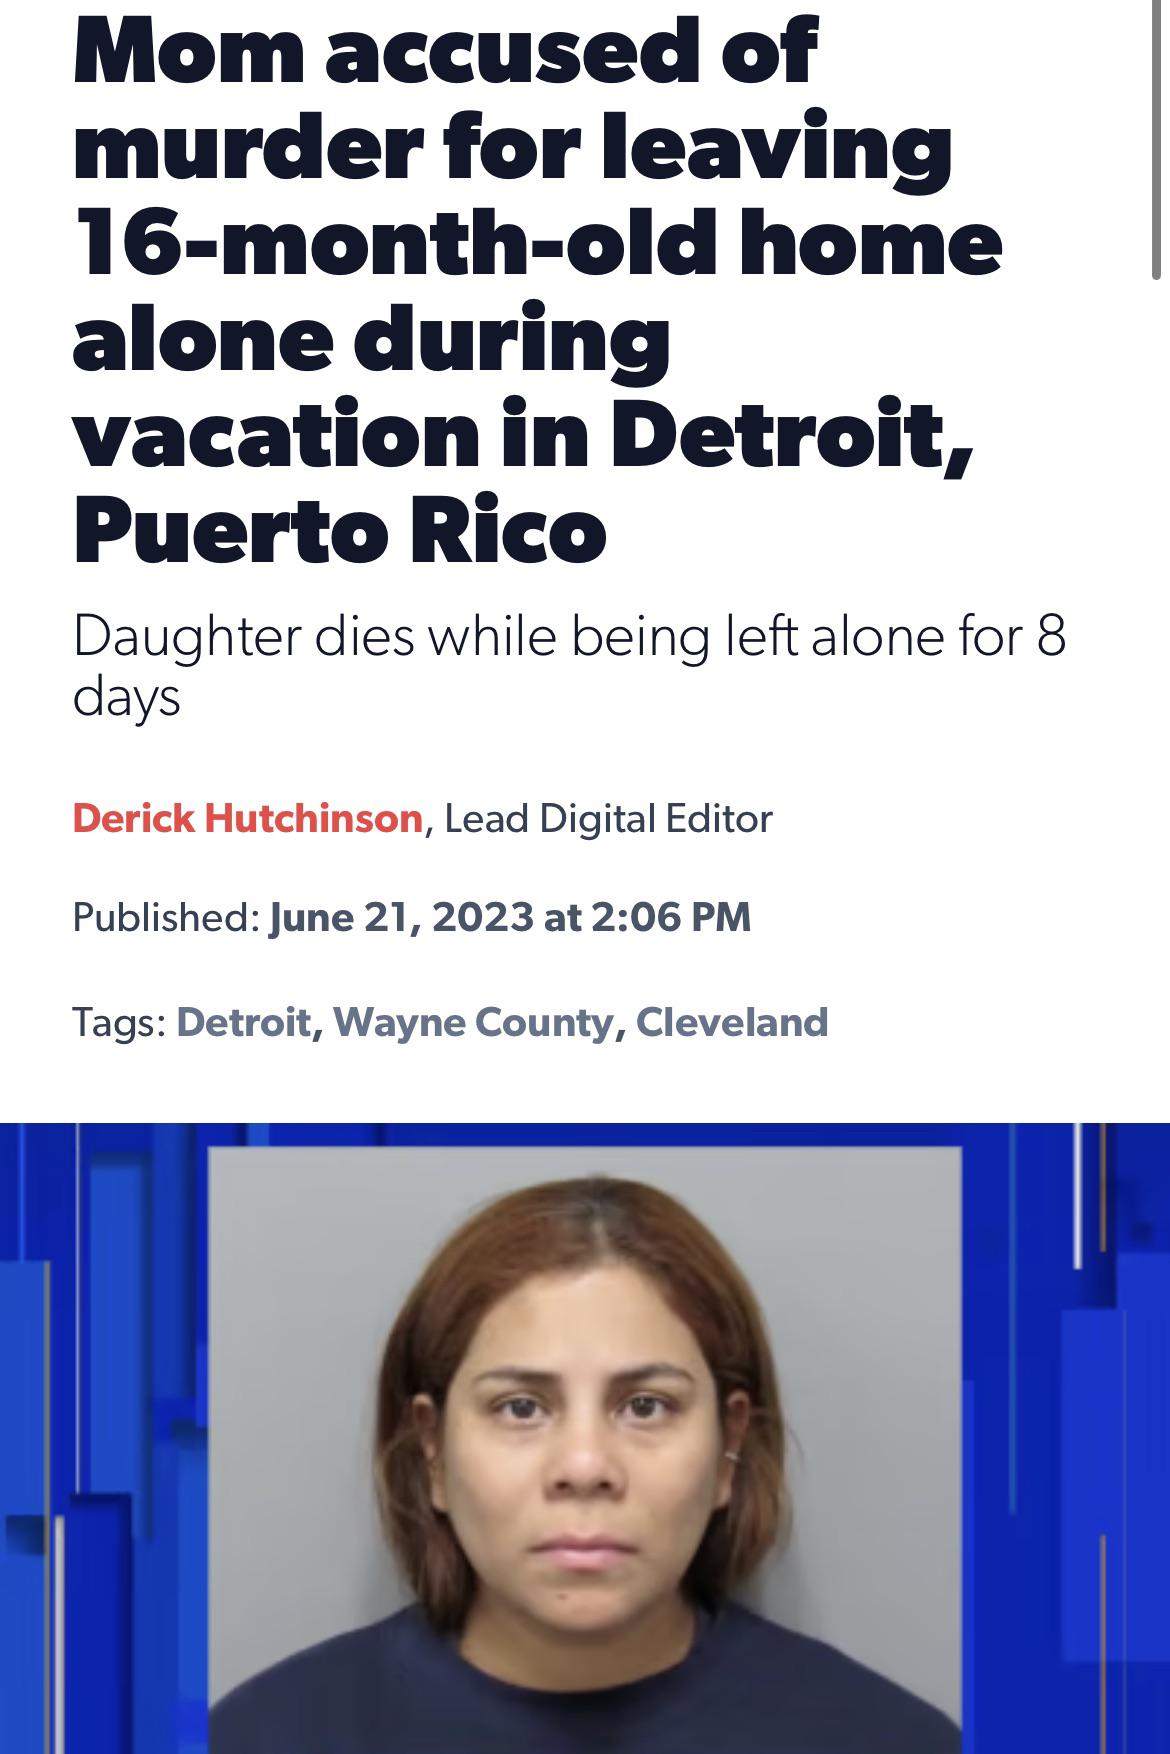 trashy people - head - Mom accused of murder for leaving 16monthold home alone during vacation in Detroit, Puerto Rico Daughter dies while being left alone for 8 days Derick Hutchinson, Lead Digital Editor Published at Tags Detroit, Wayne County, Clevelan